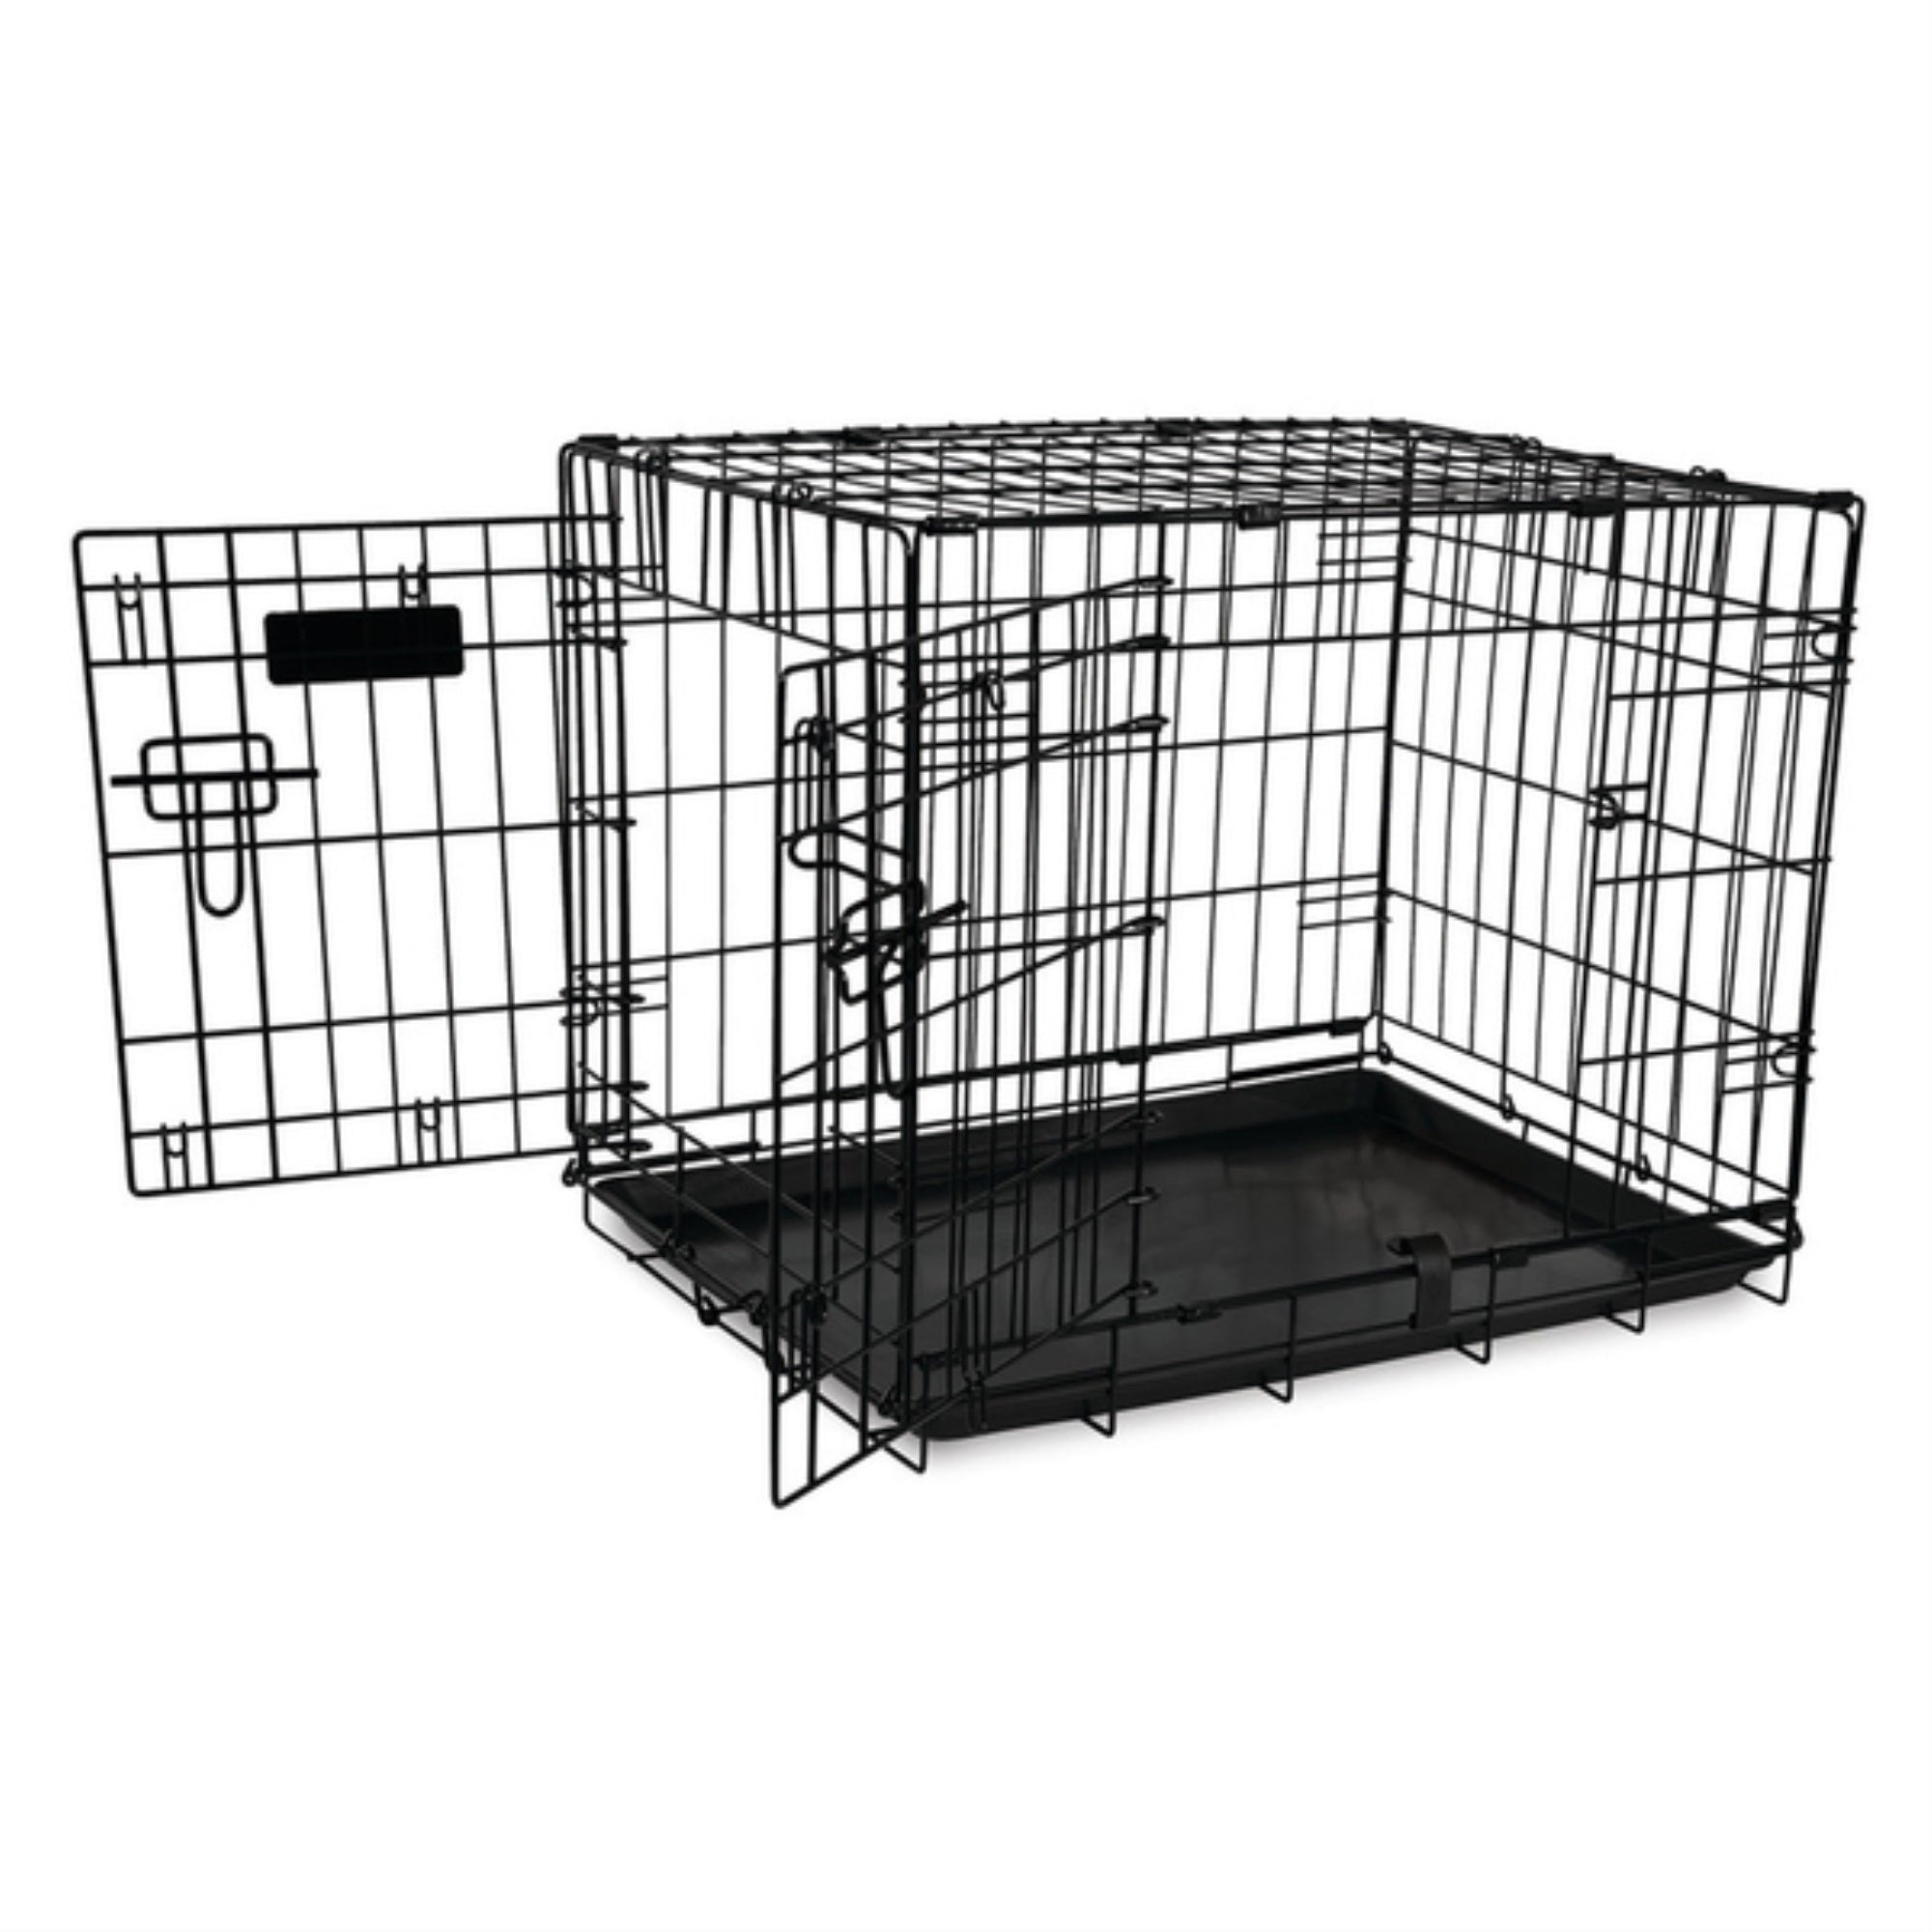 Petmate 2 Door Training Retreat Dog Kennel Hard-Sided Black 24 in - PDS-029695219528